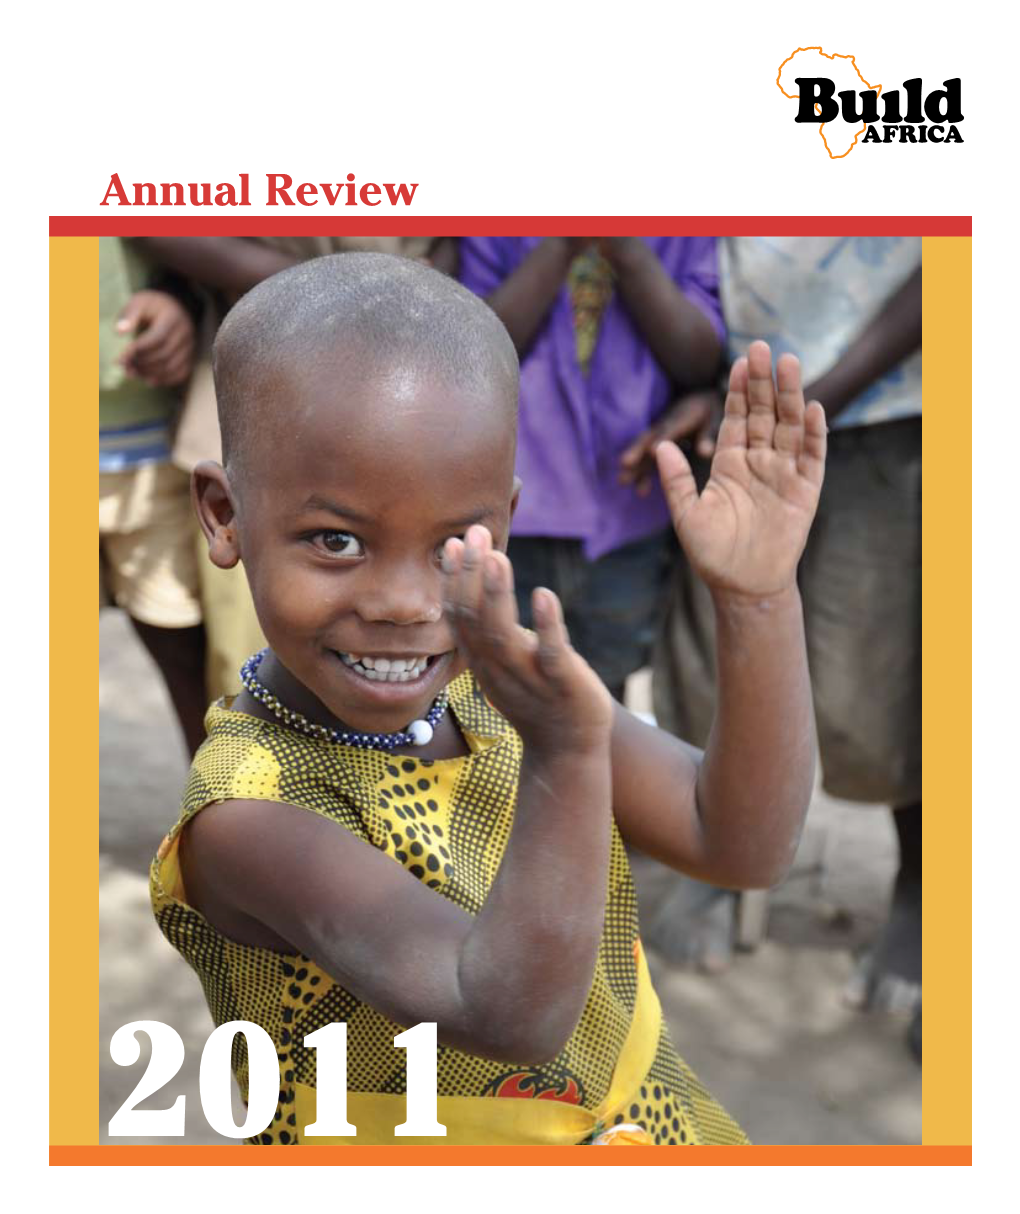 Annual Review Contents